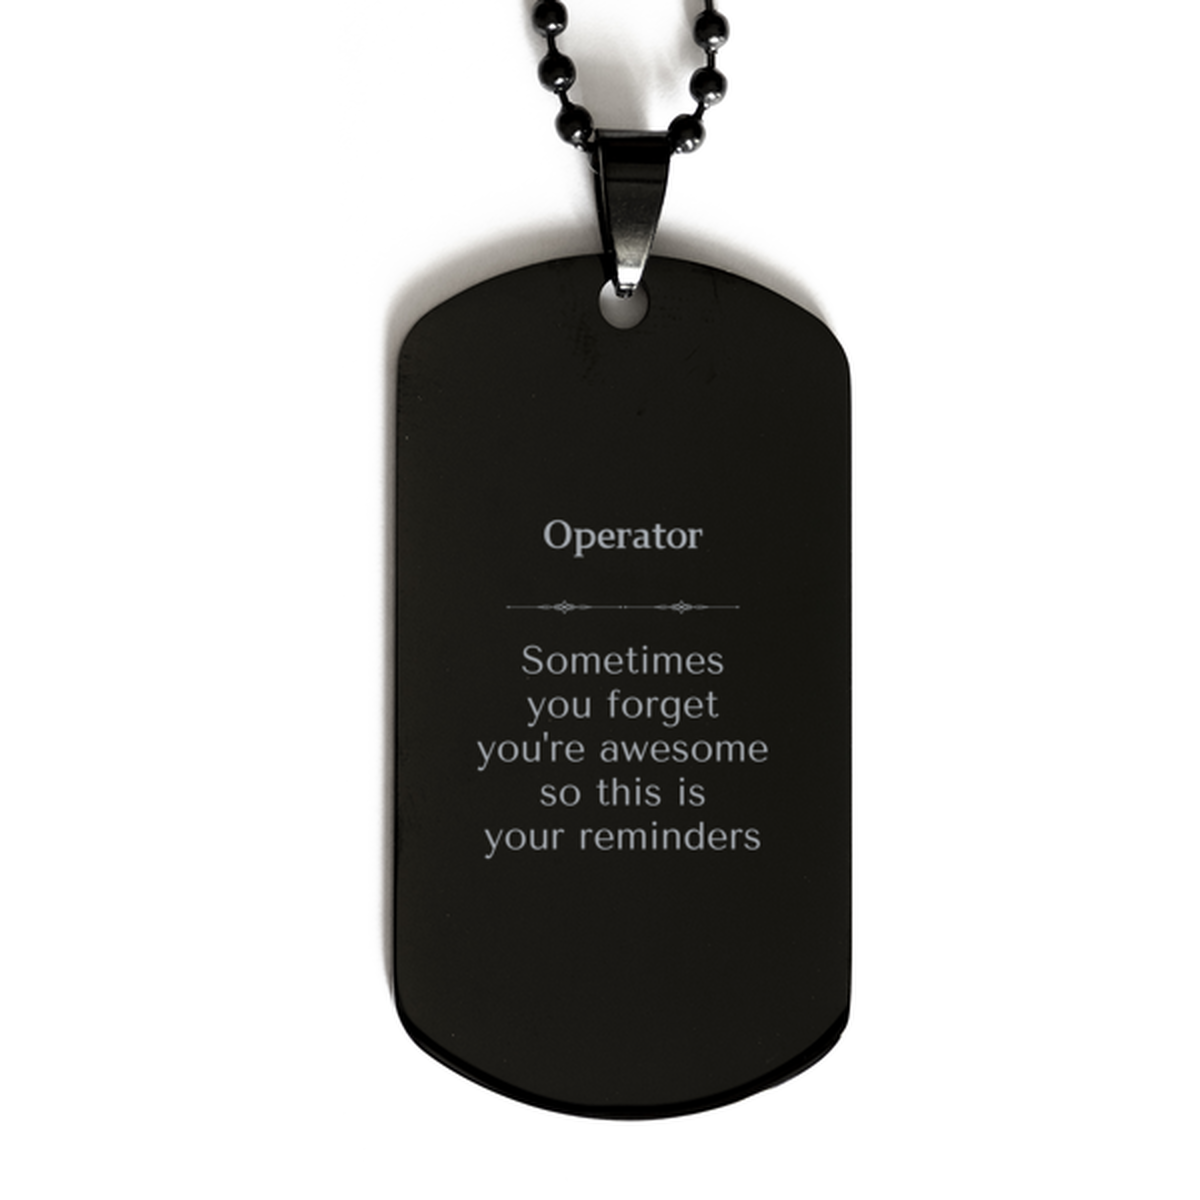 Sentimental Operator Black Dog Tag, Operator Sometimes you forget you're awesome so this is your reminders, Graduation Christmas Birthday Gifts for Operator, Men, Women, Coworkers